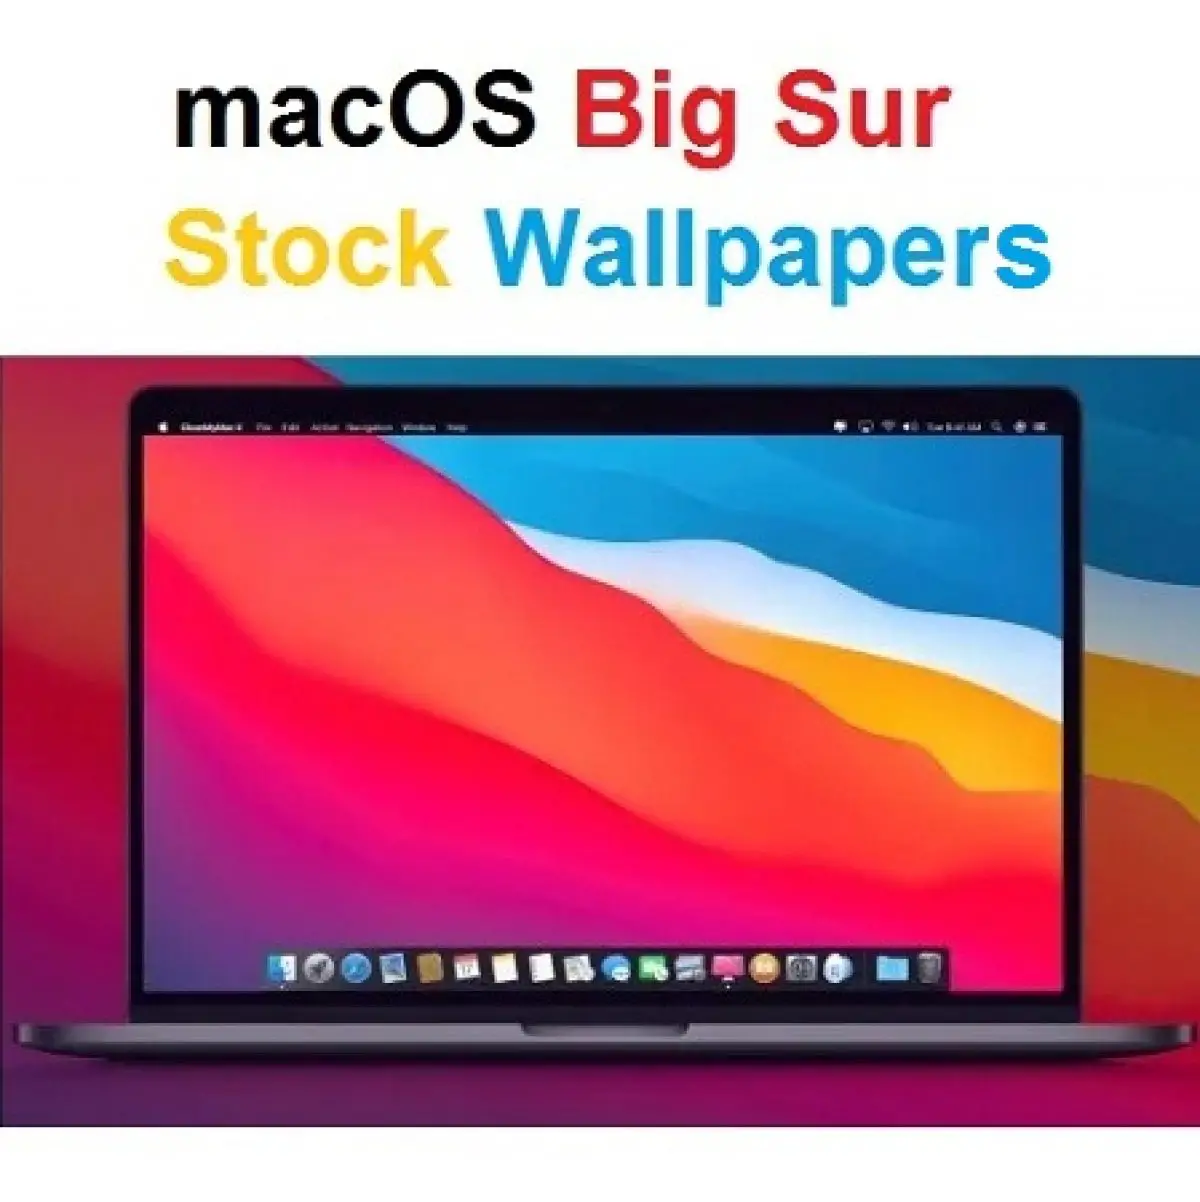 Download Macos Big Sur Wallpapers For Any Device Free